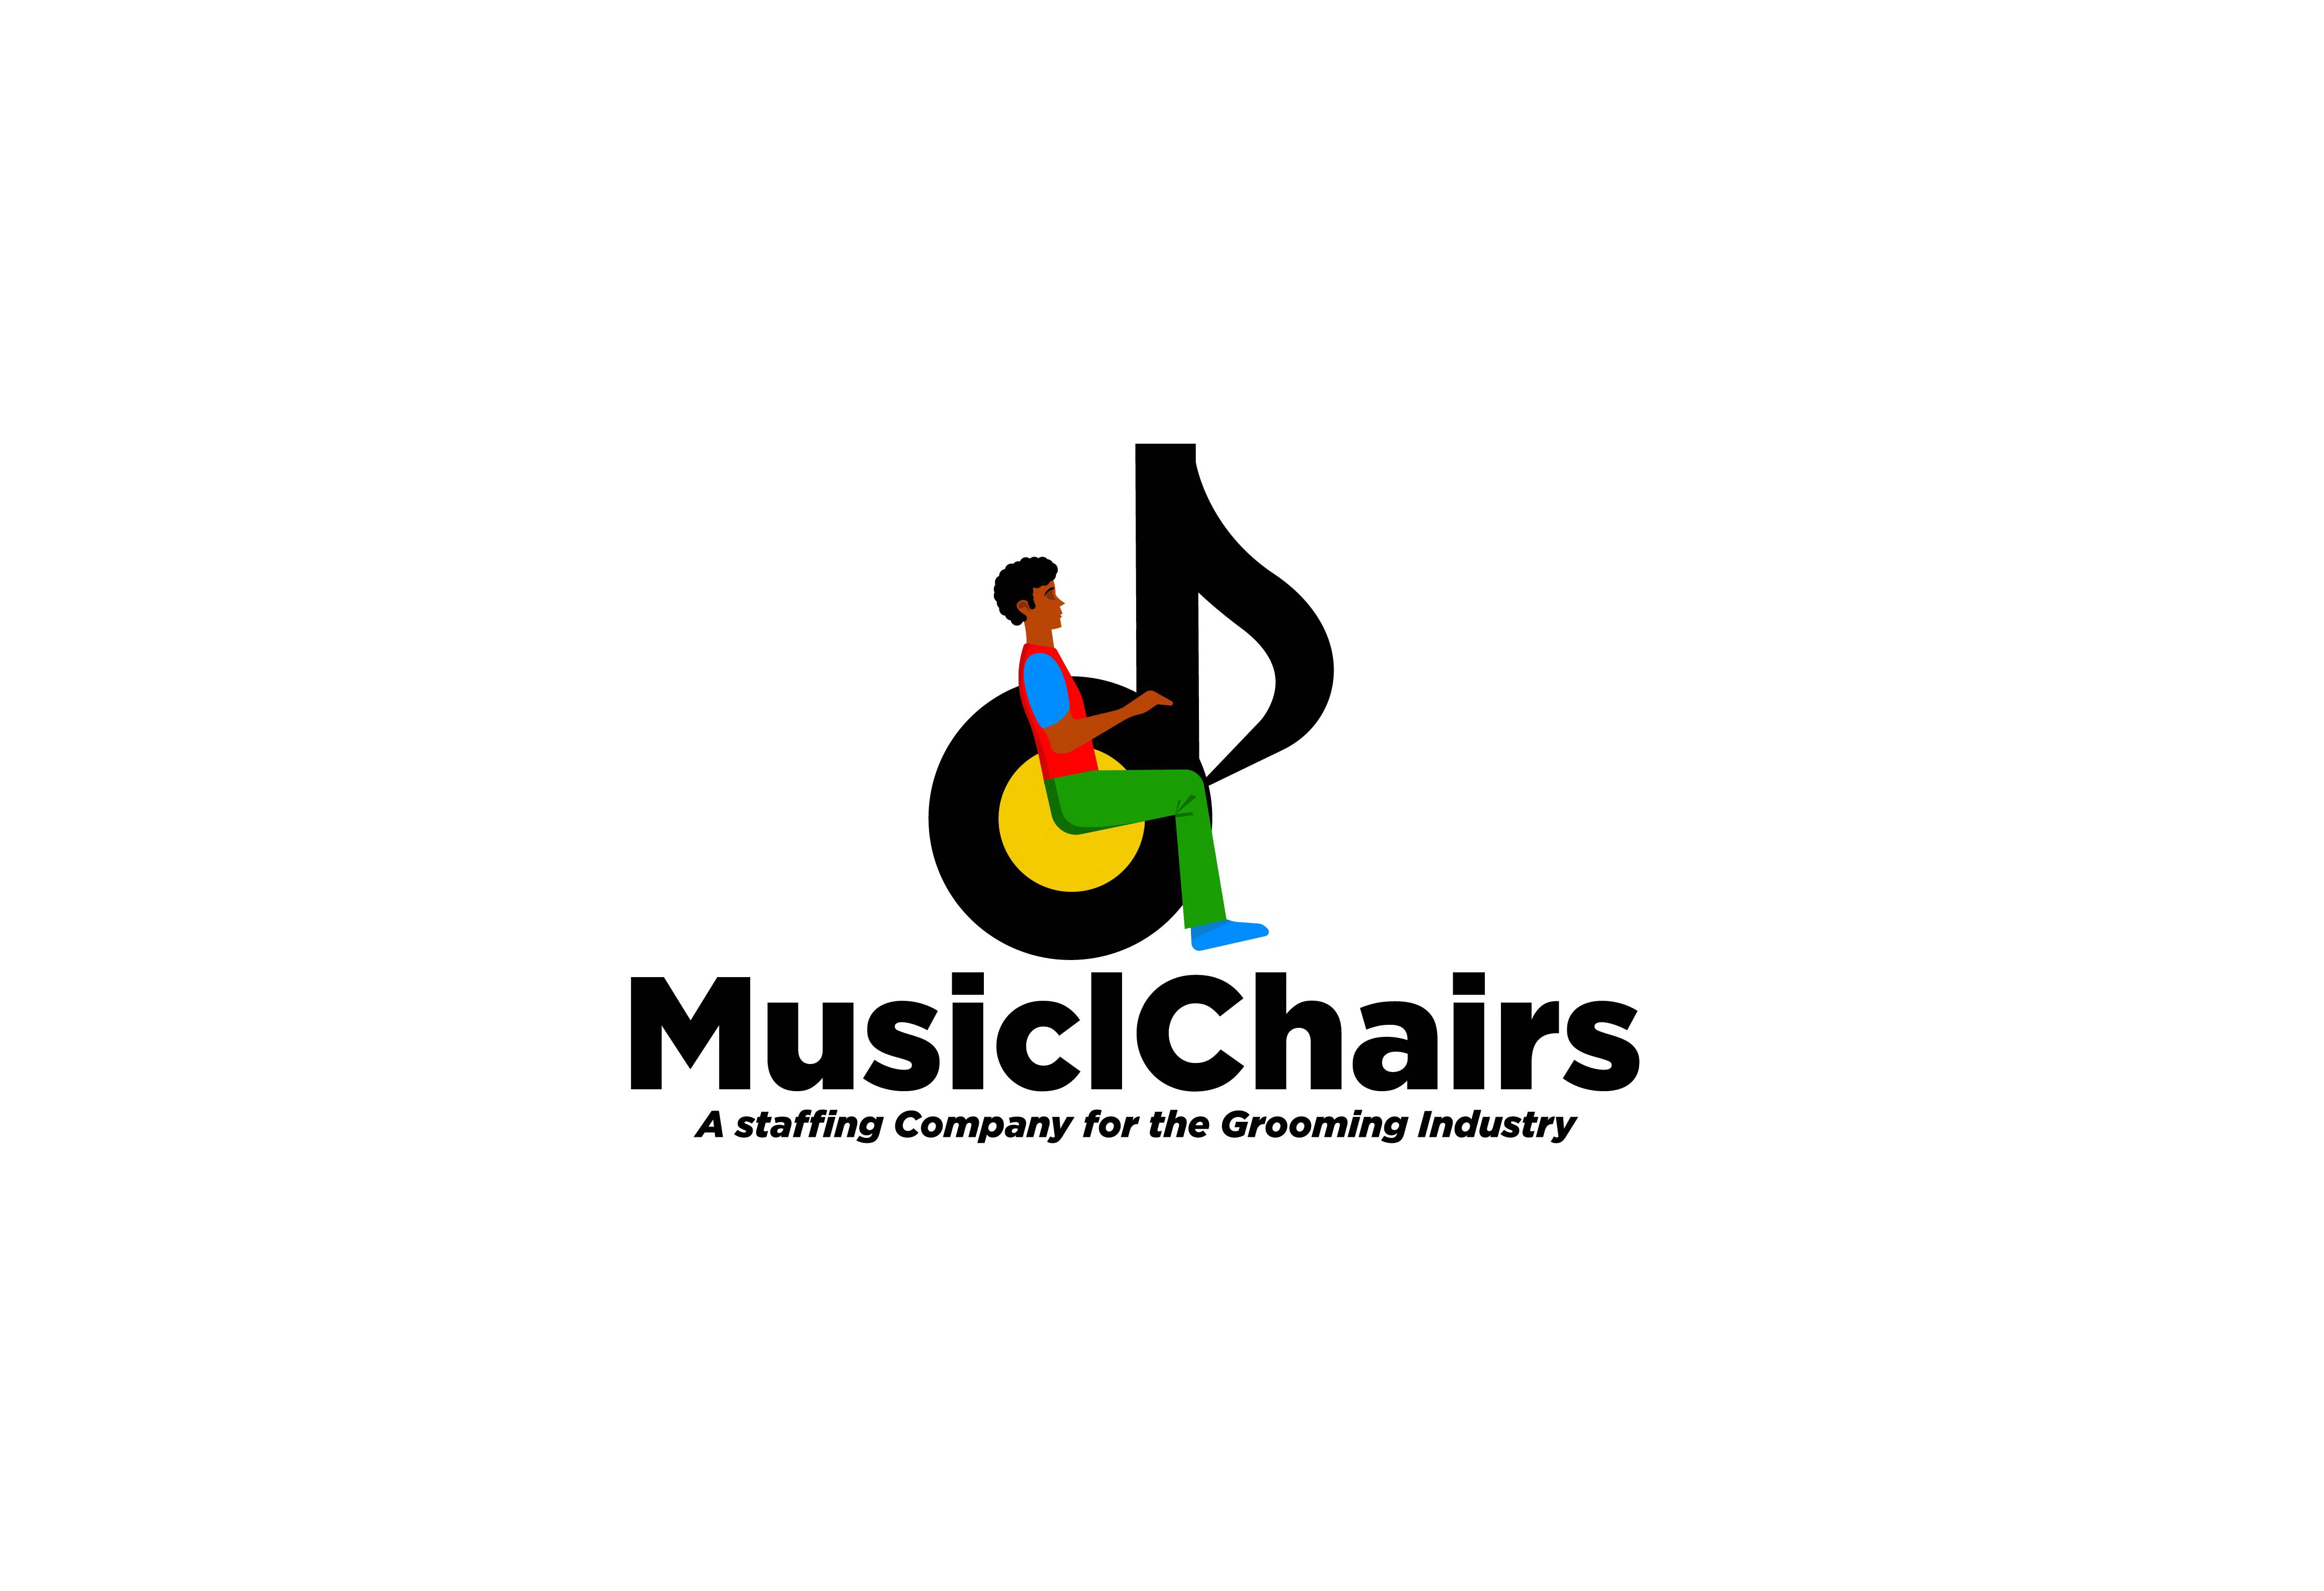  MUSICLCHAIRS A STAFFING COMPANY FOR THE GROOMING INDUSTRY